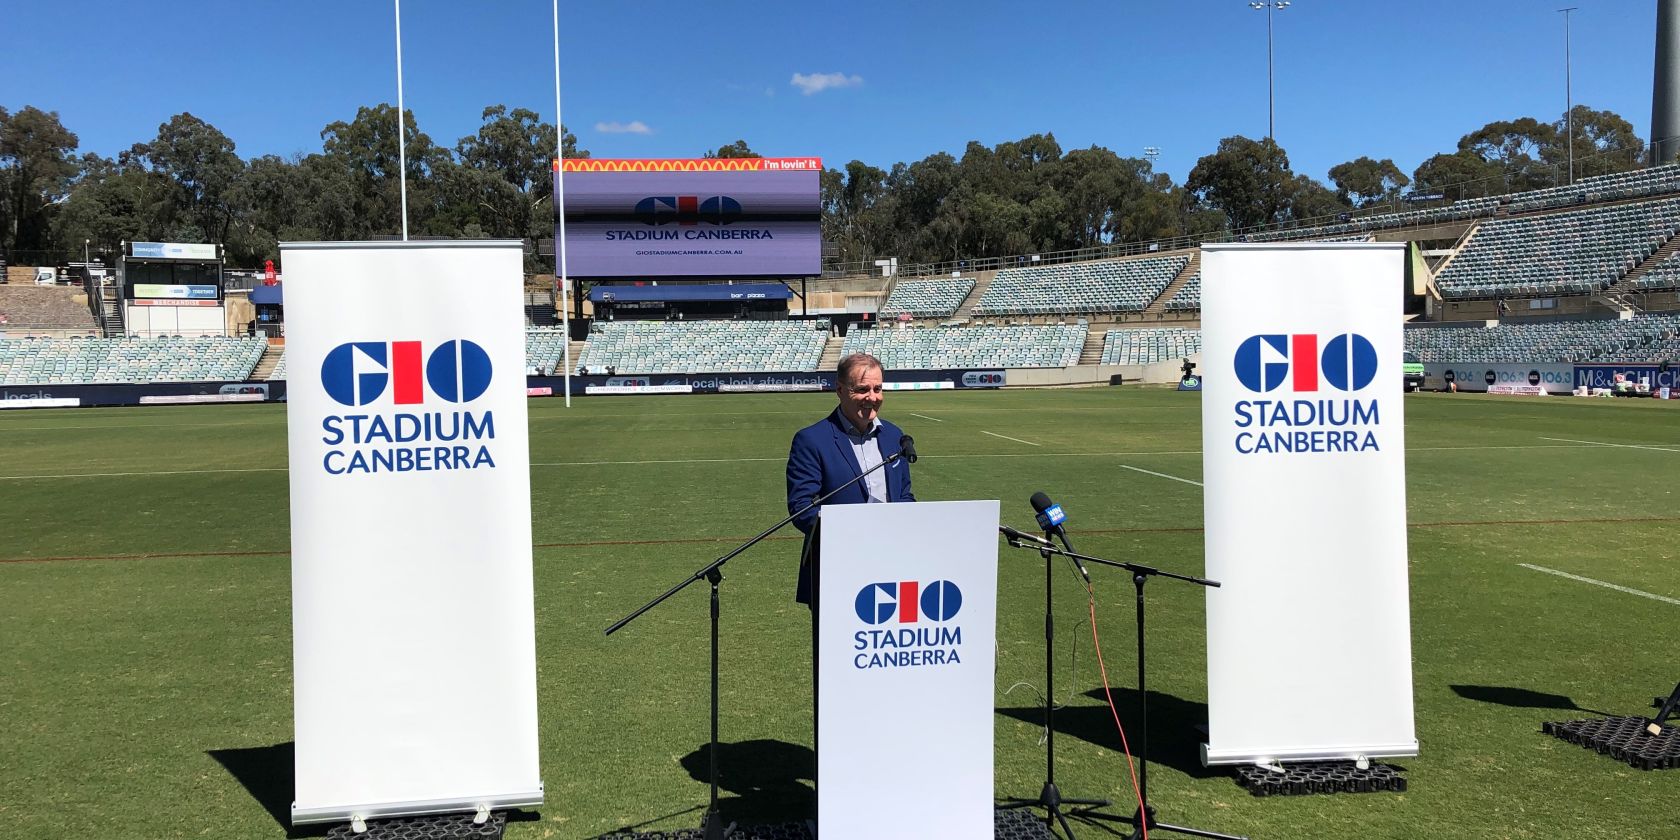 GIO extends Canberra Stadium naming rights sponsorship